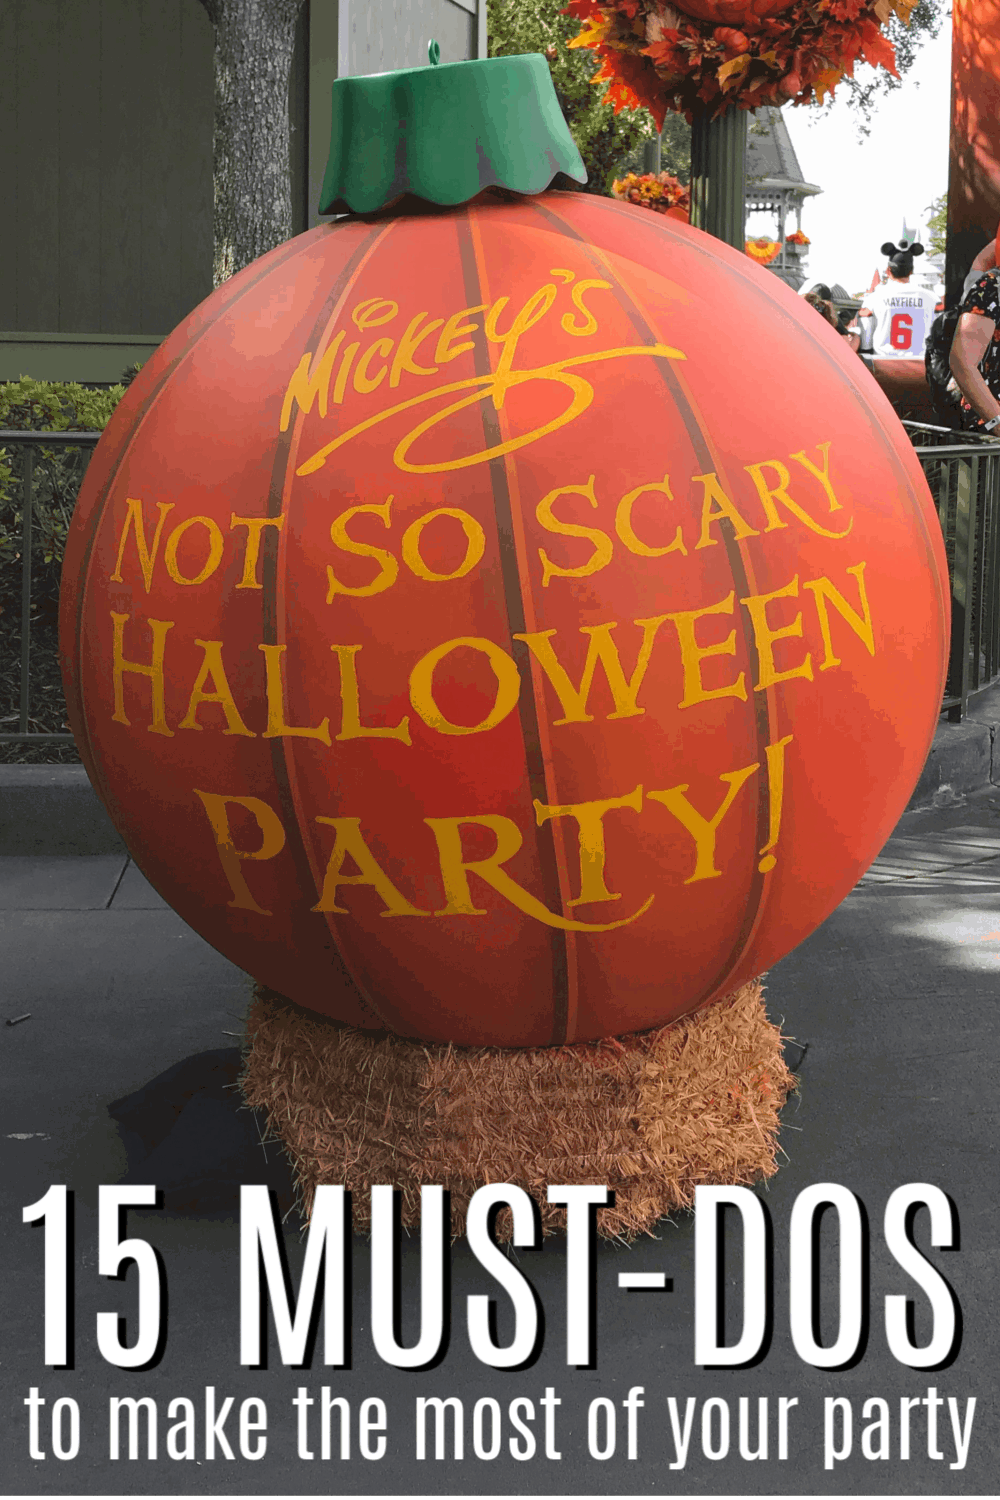 Ready to make the most of your Disney Halloween party fun? From when to trick-or-treat to where to catch the fireworks, here are 15 must-dos for Mickey's Not-So-Scary Halloween Party at Disney World! #Disney #WDW #Halloween #DisneyHalloweenParty #FamilyTravel 